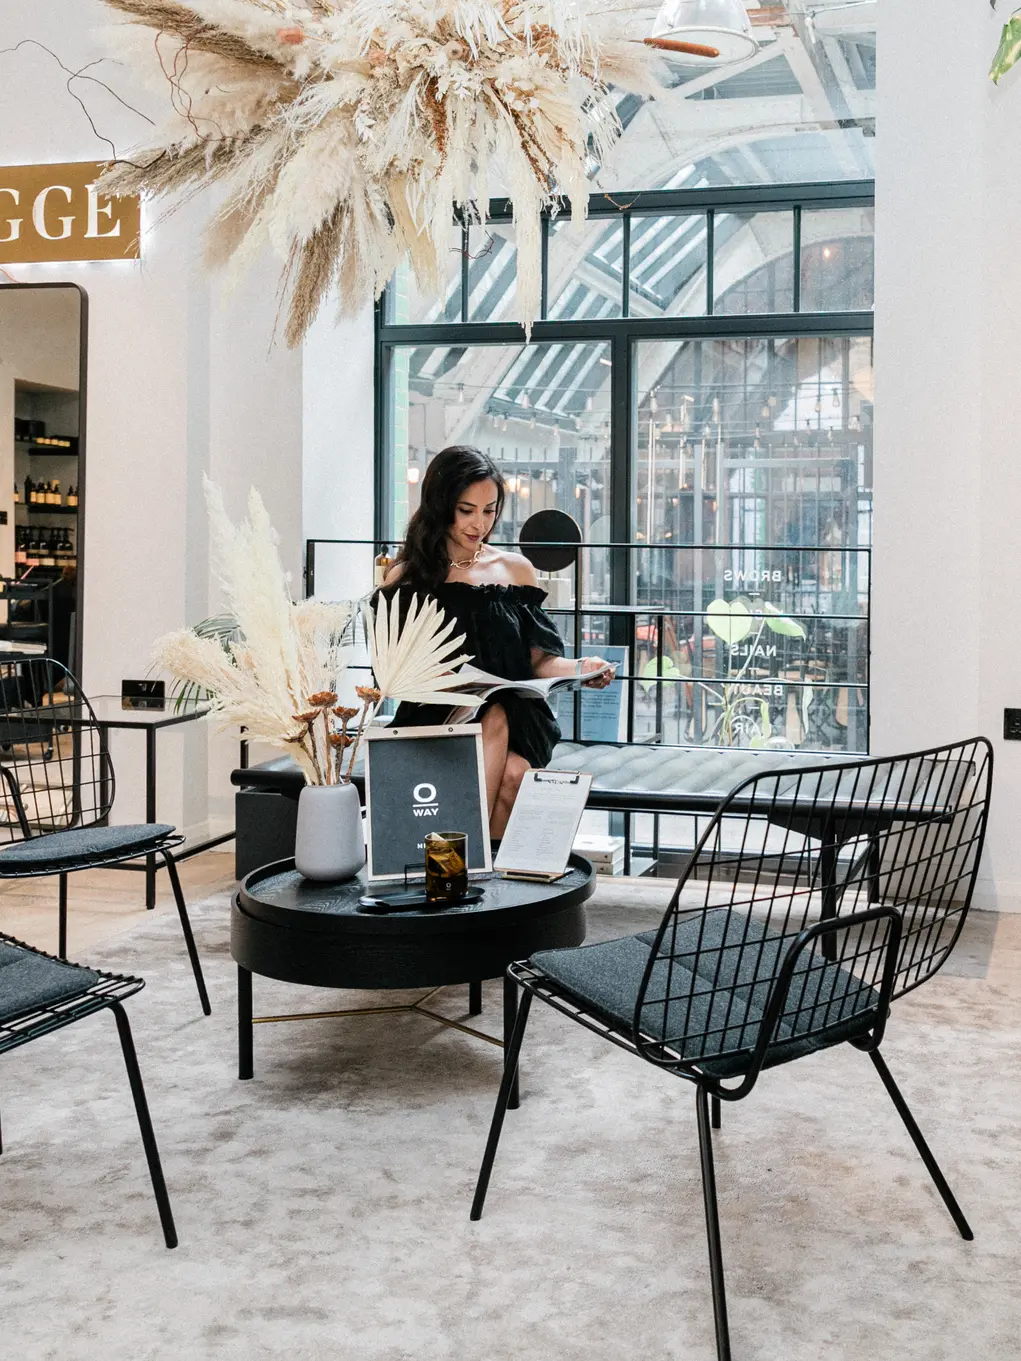 A woman sits in a beauty salon with a sign saying 'Hygge' in the background